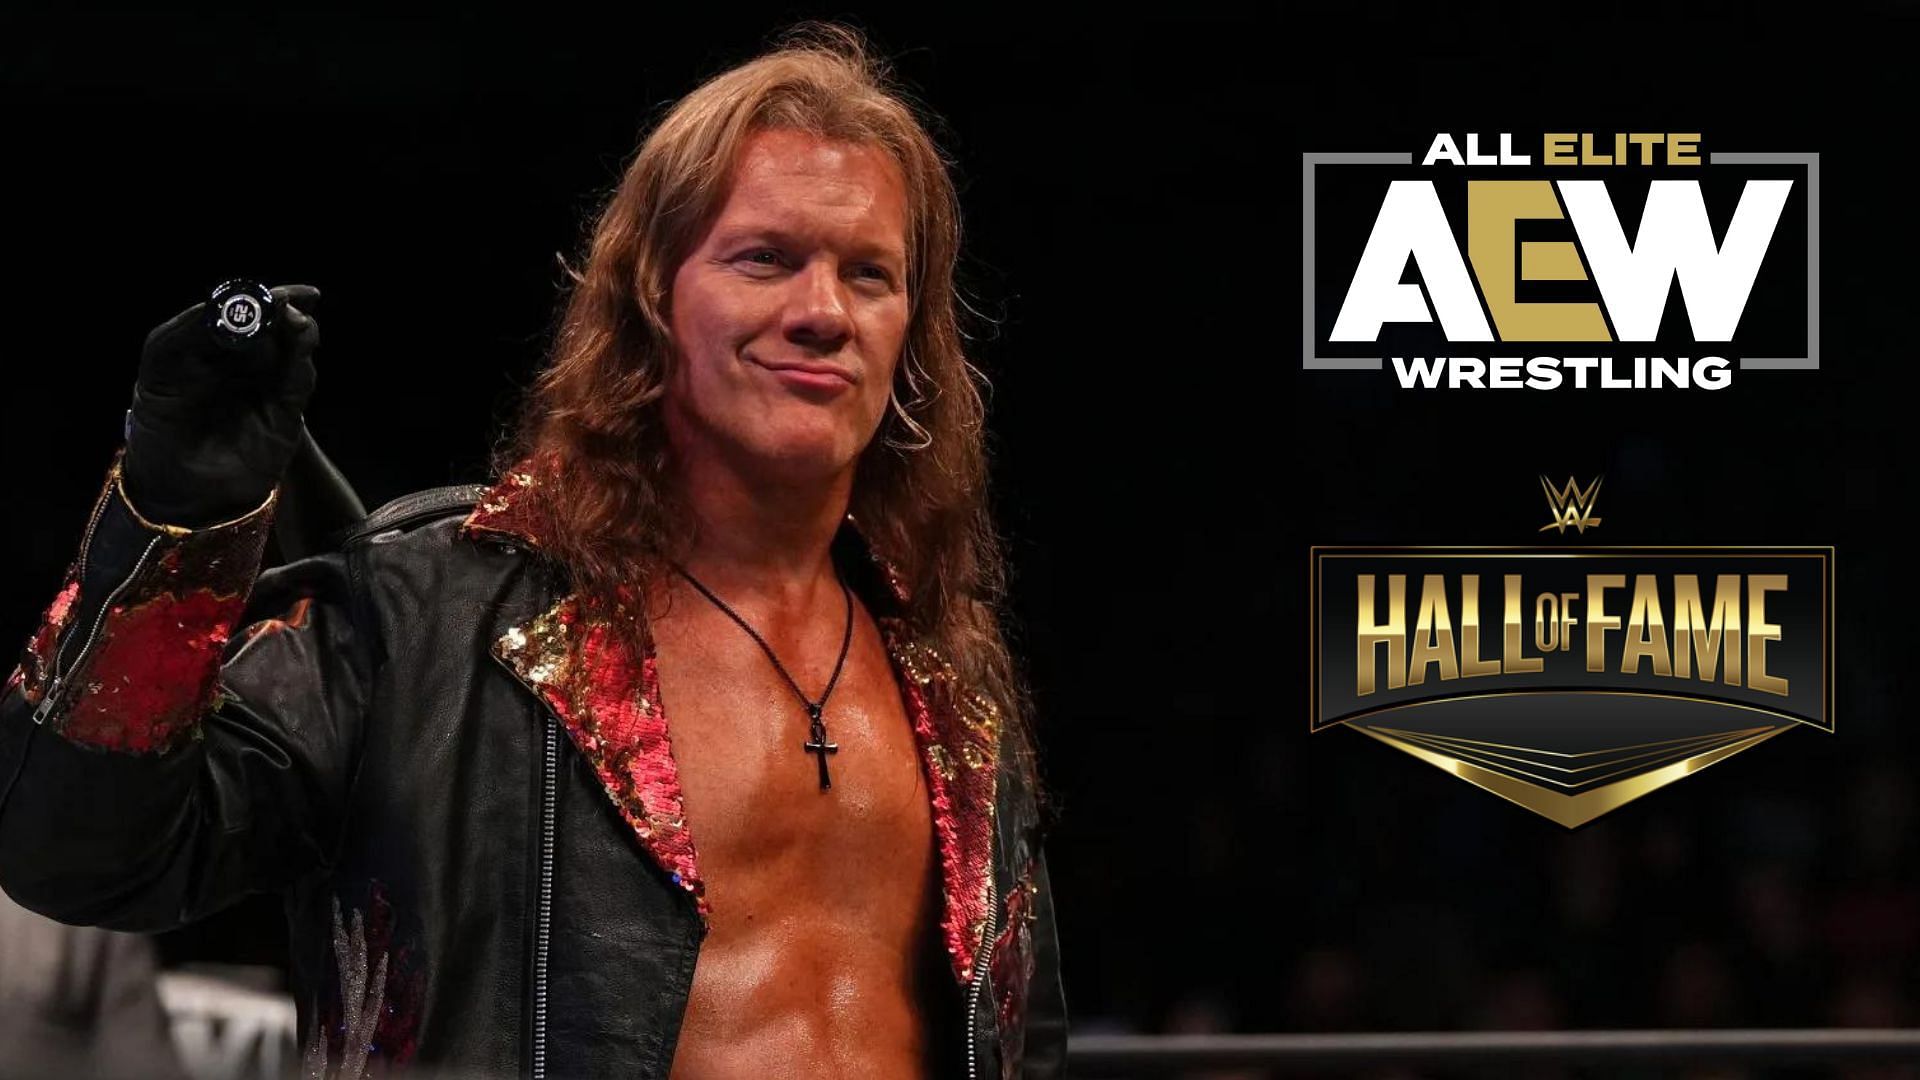 Chris Jericho is a former ROH World Champion